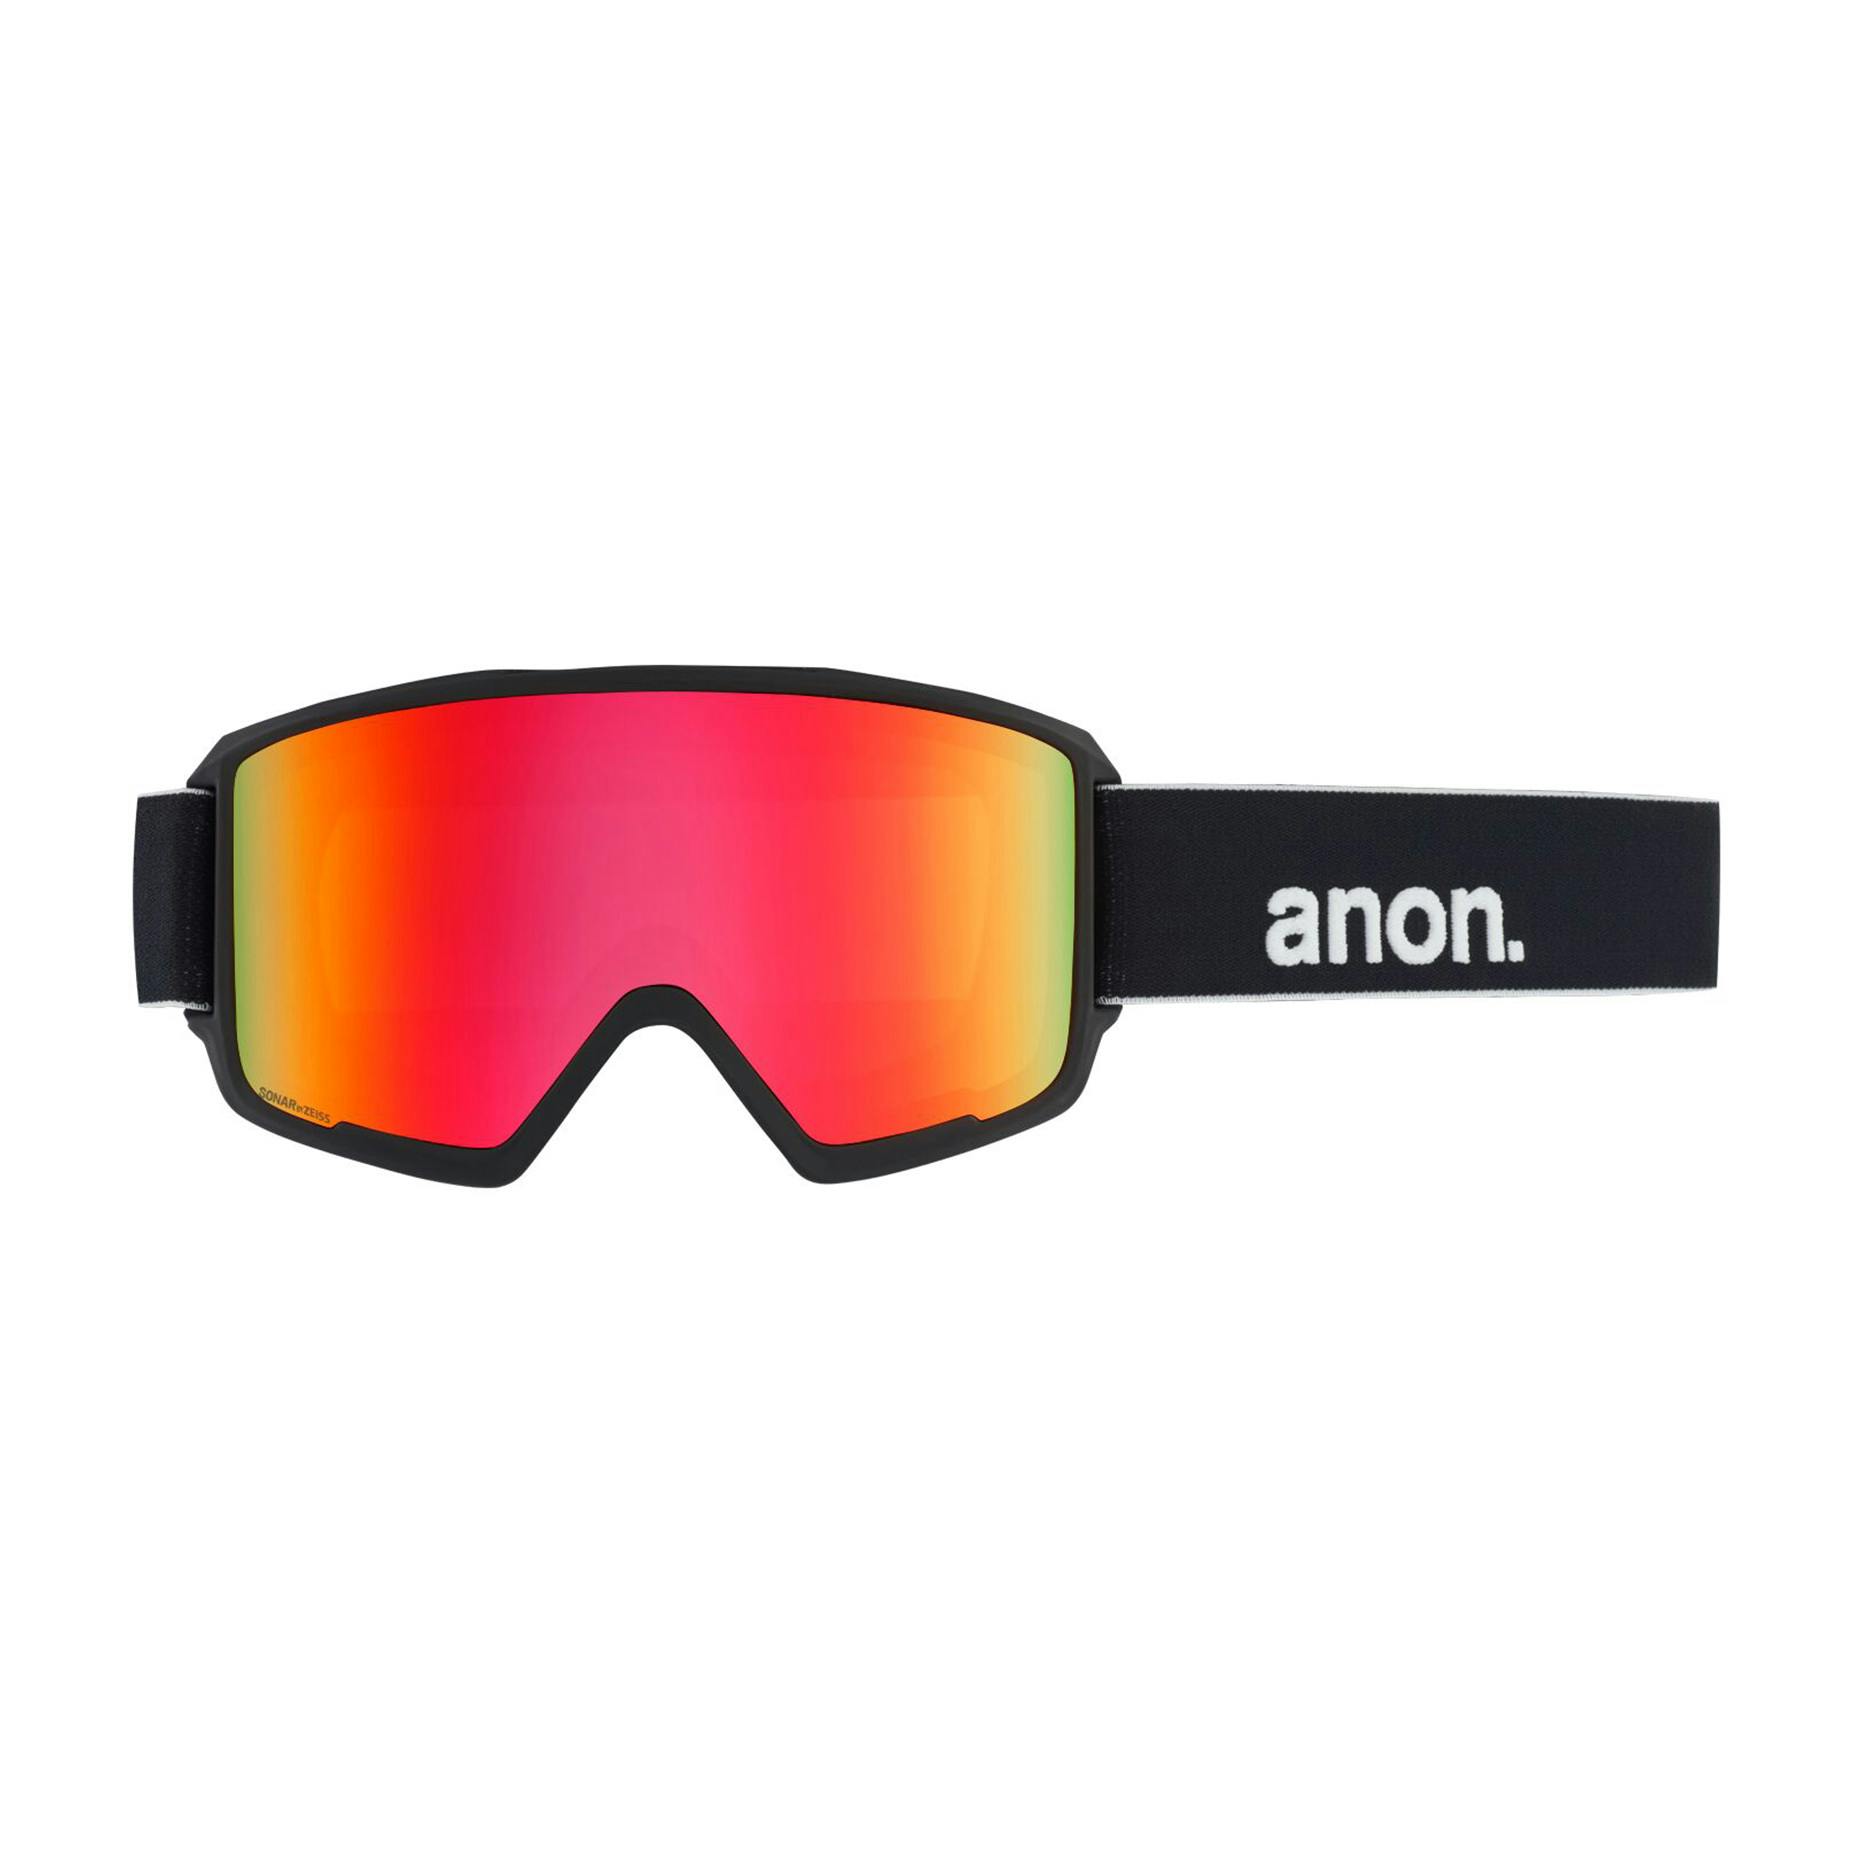 Anon M3 MFI Facemask Goggles Redplanet Spare Lens Sonar Red